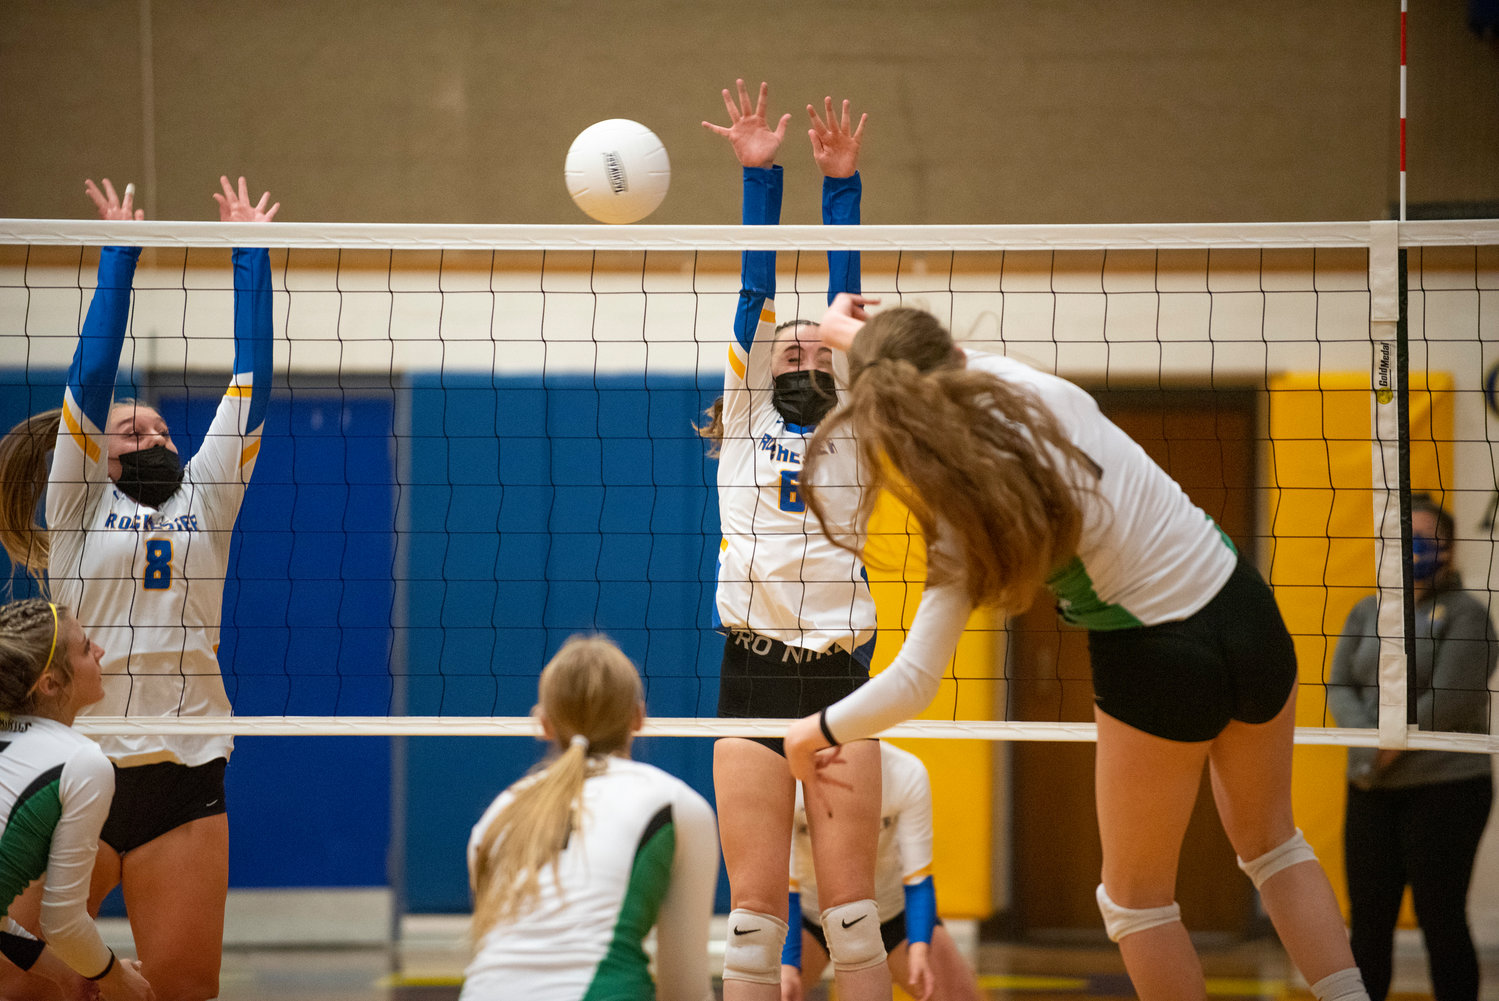 Tumwater's Alyssa Duncan (1) spikes against Rochester's Hailey Angwood (8) and Lauren Rotter (6) during a match in Rochester on Oct. 19, 2021.